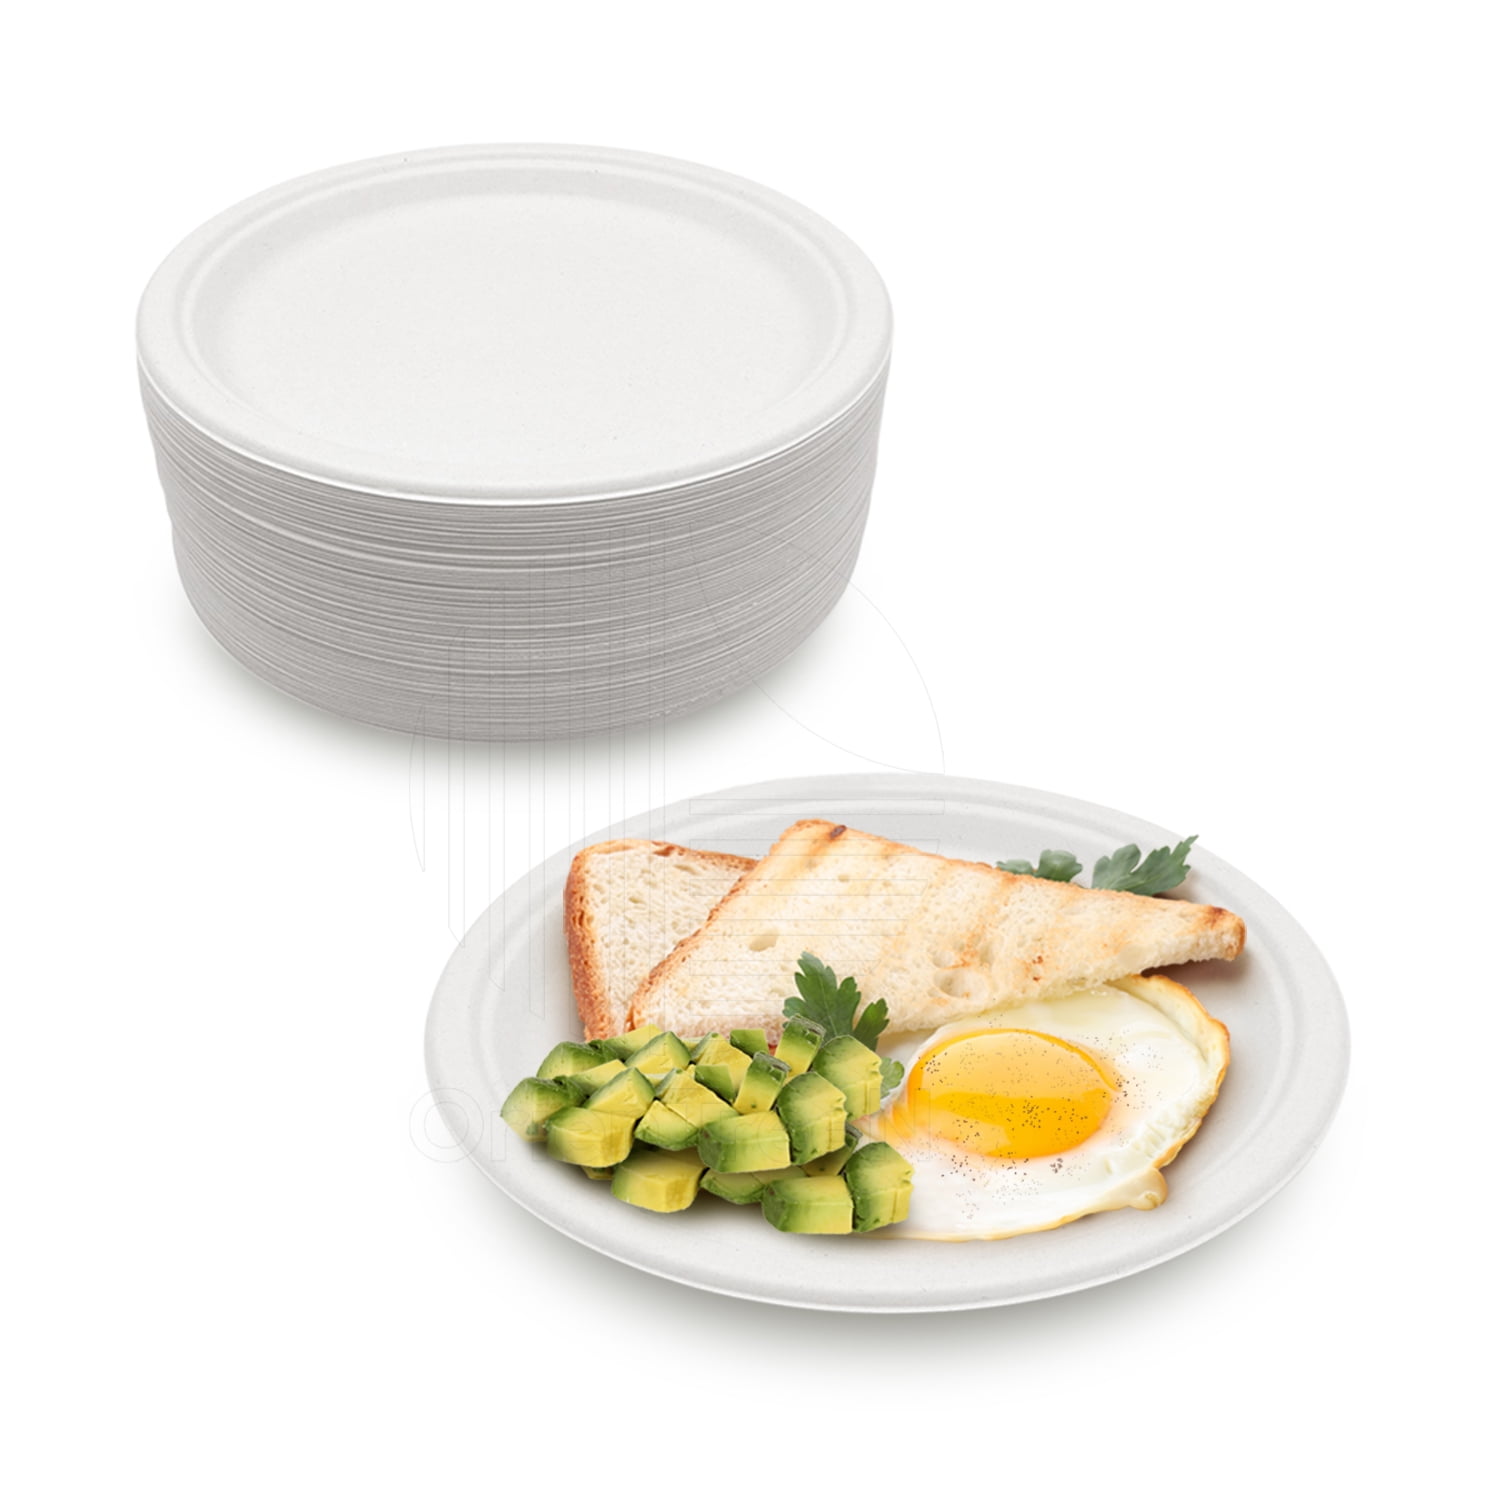 7 Eco-Friendly Disposable Plate (100 Count), 100 - Harris Teeter